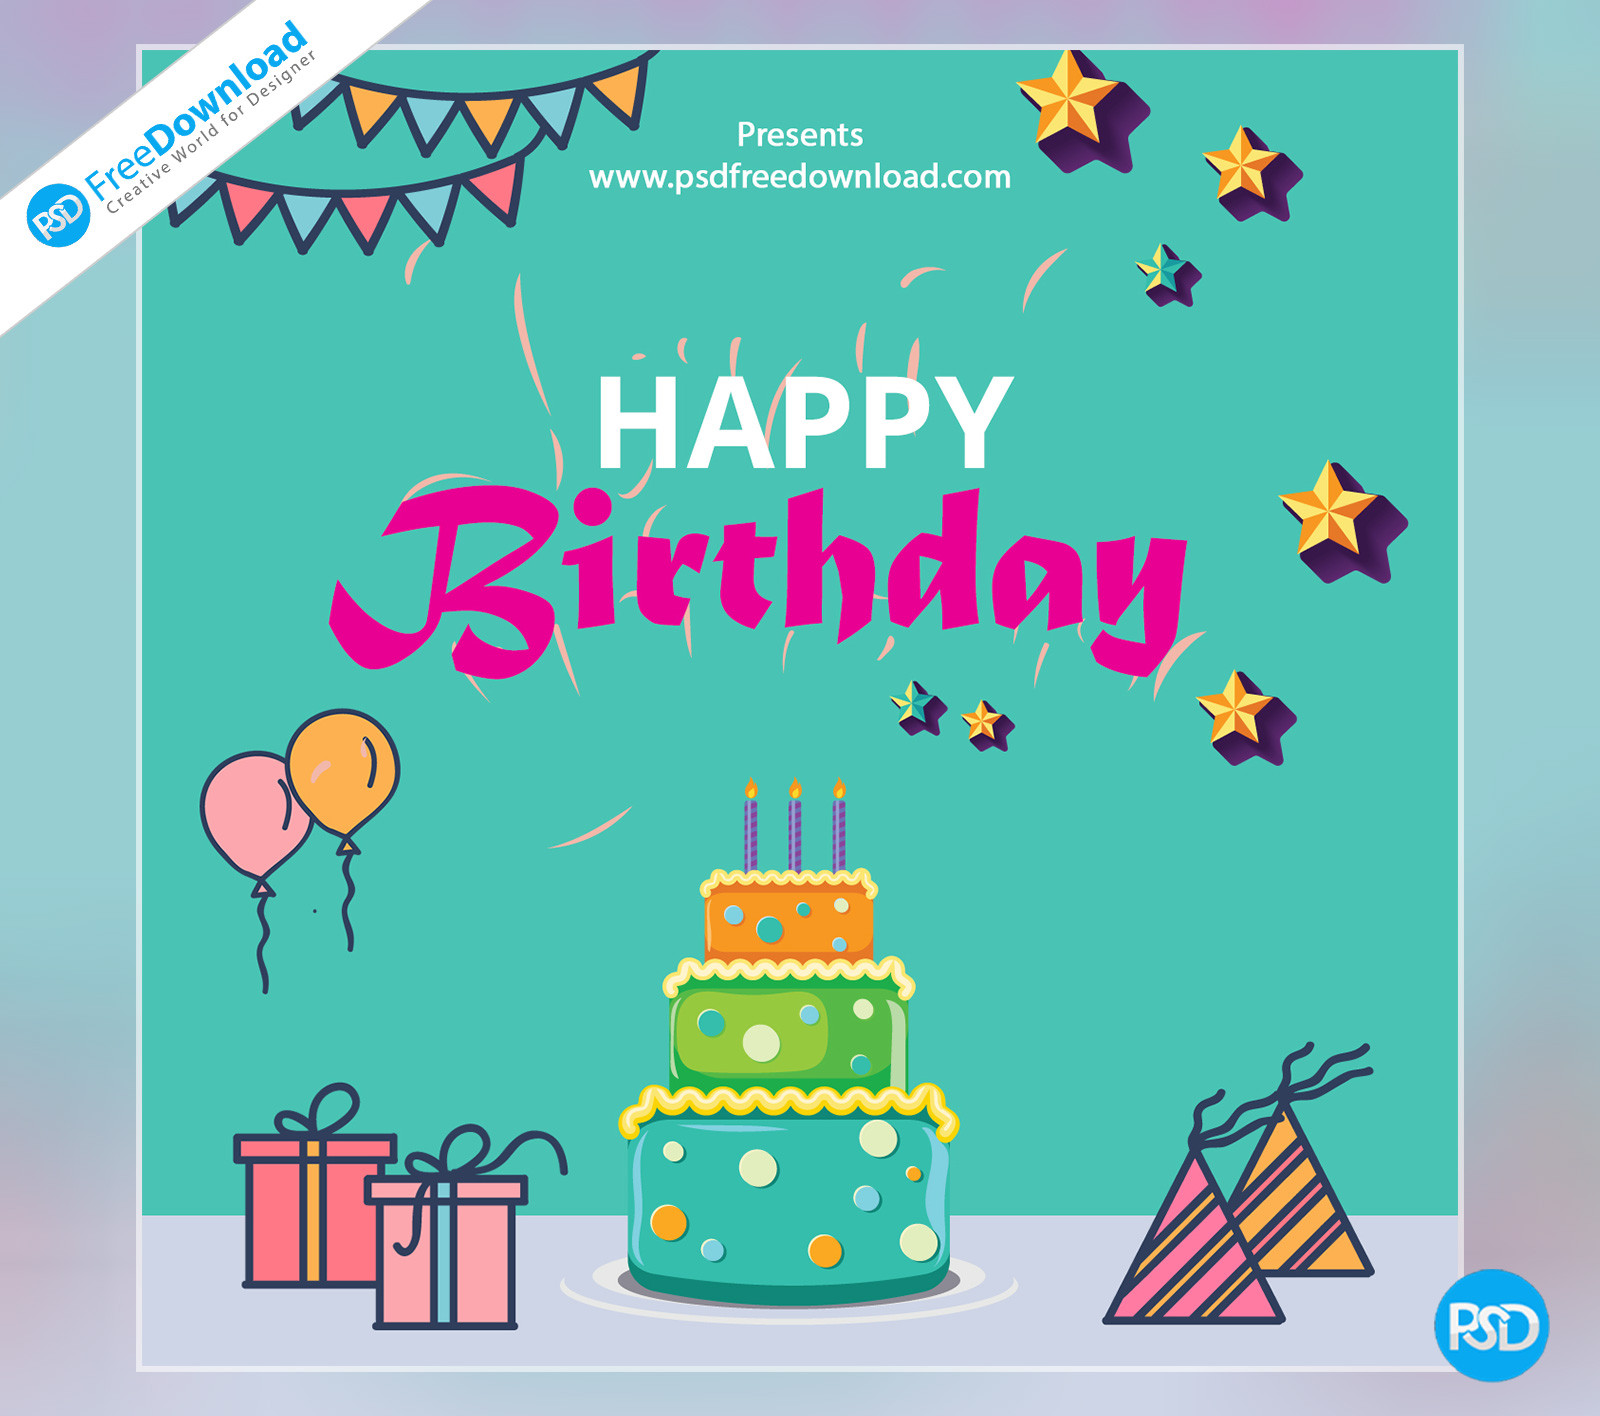 Happy Birthday Card Template
 Happy Birthday Template Greeting Card PSD Free Download